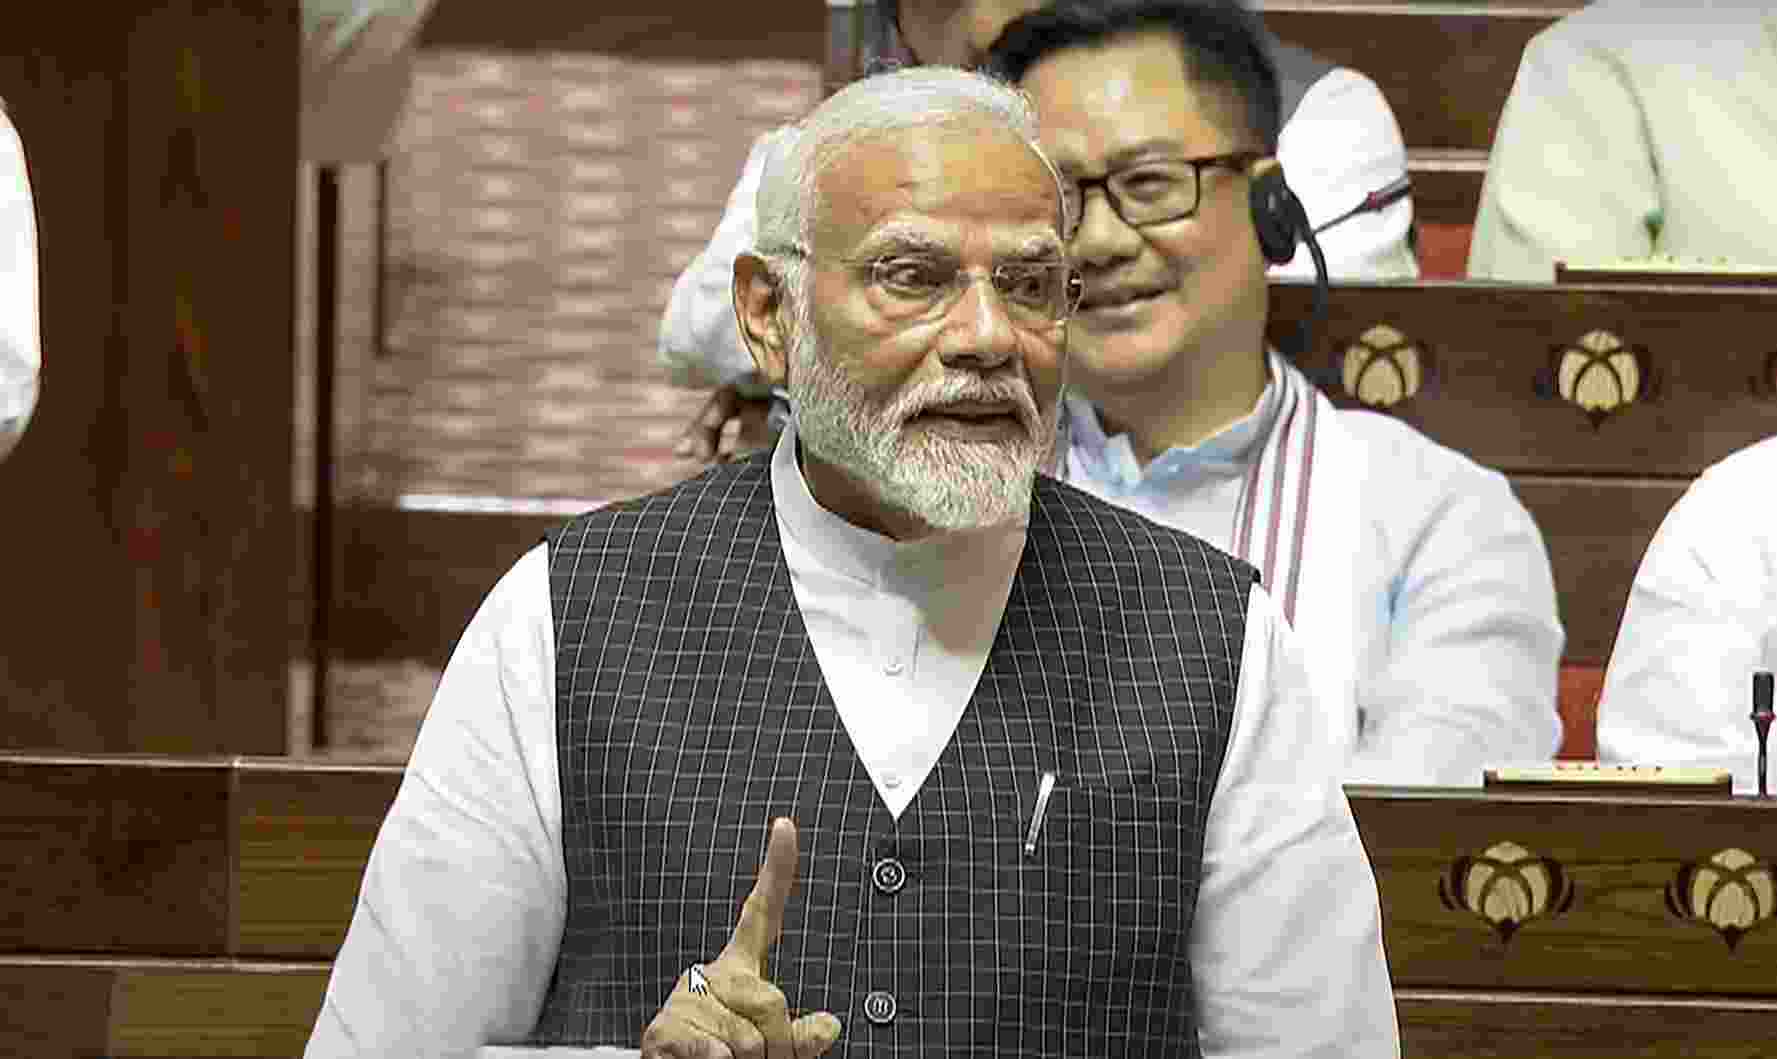 From promising action against people responsible for the NEET paper leak to vowing to end corruption to the government’s economic achievements, Prime Minister Narendra Modi’s reply to the Motion of Thanks to the President’s address at the Rajya Sabha on Wednesday covered wide-ranging issues.